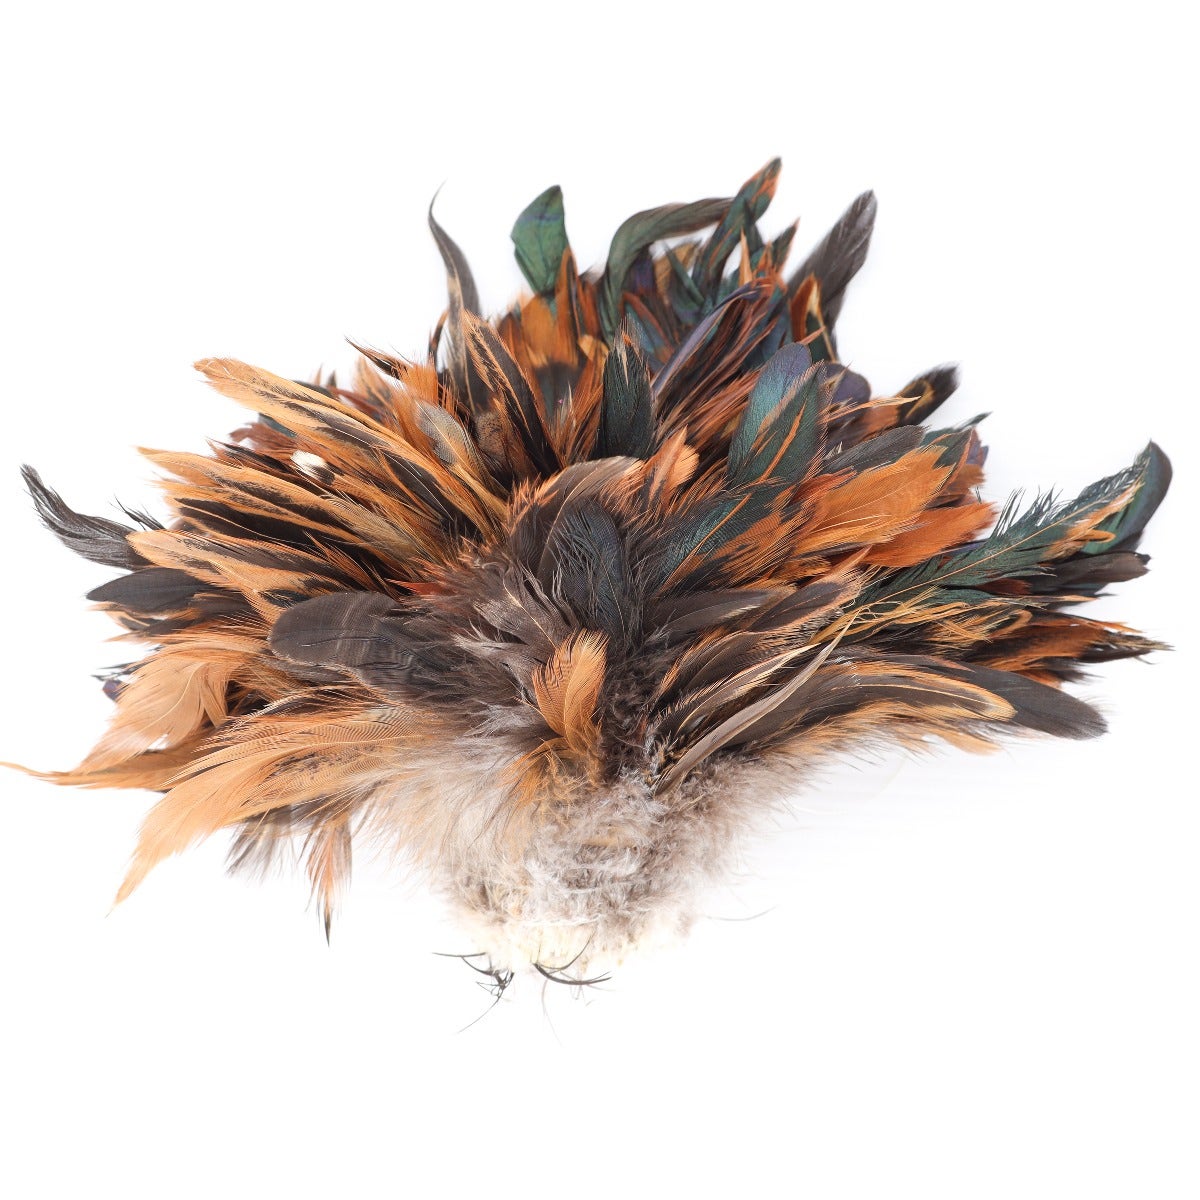 Natural Rooster Feathers, 2" strip of 4-6” Rooster Strung Craft Feathers - Natural